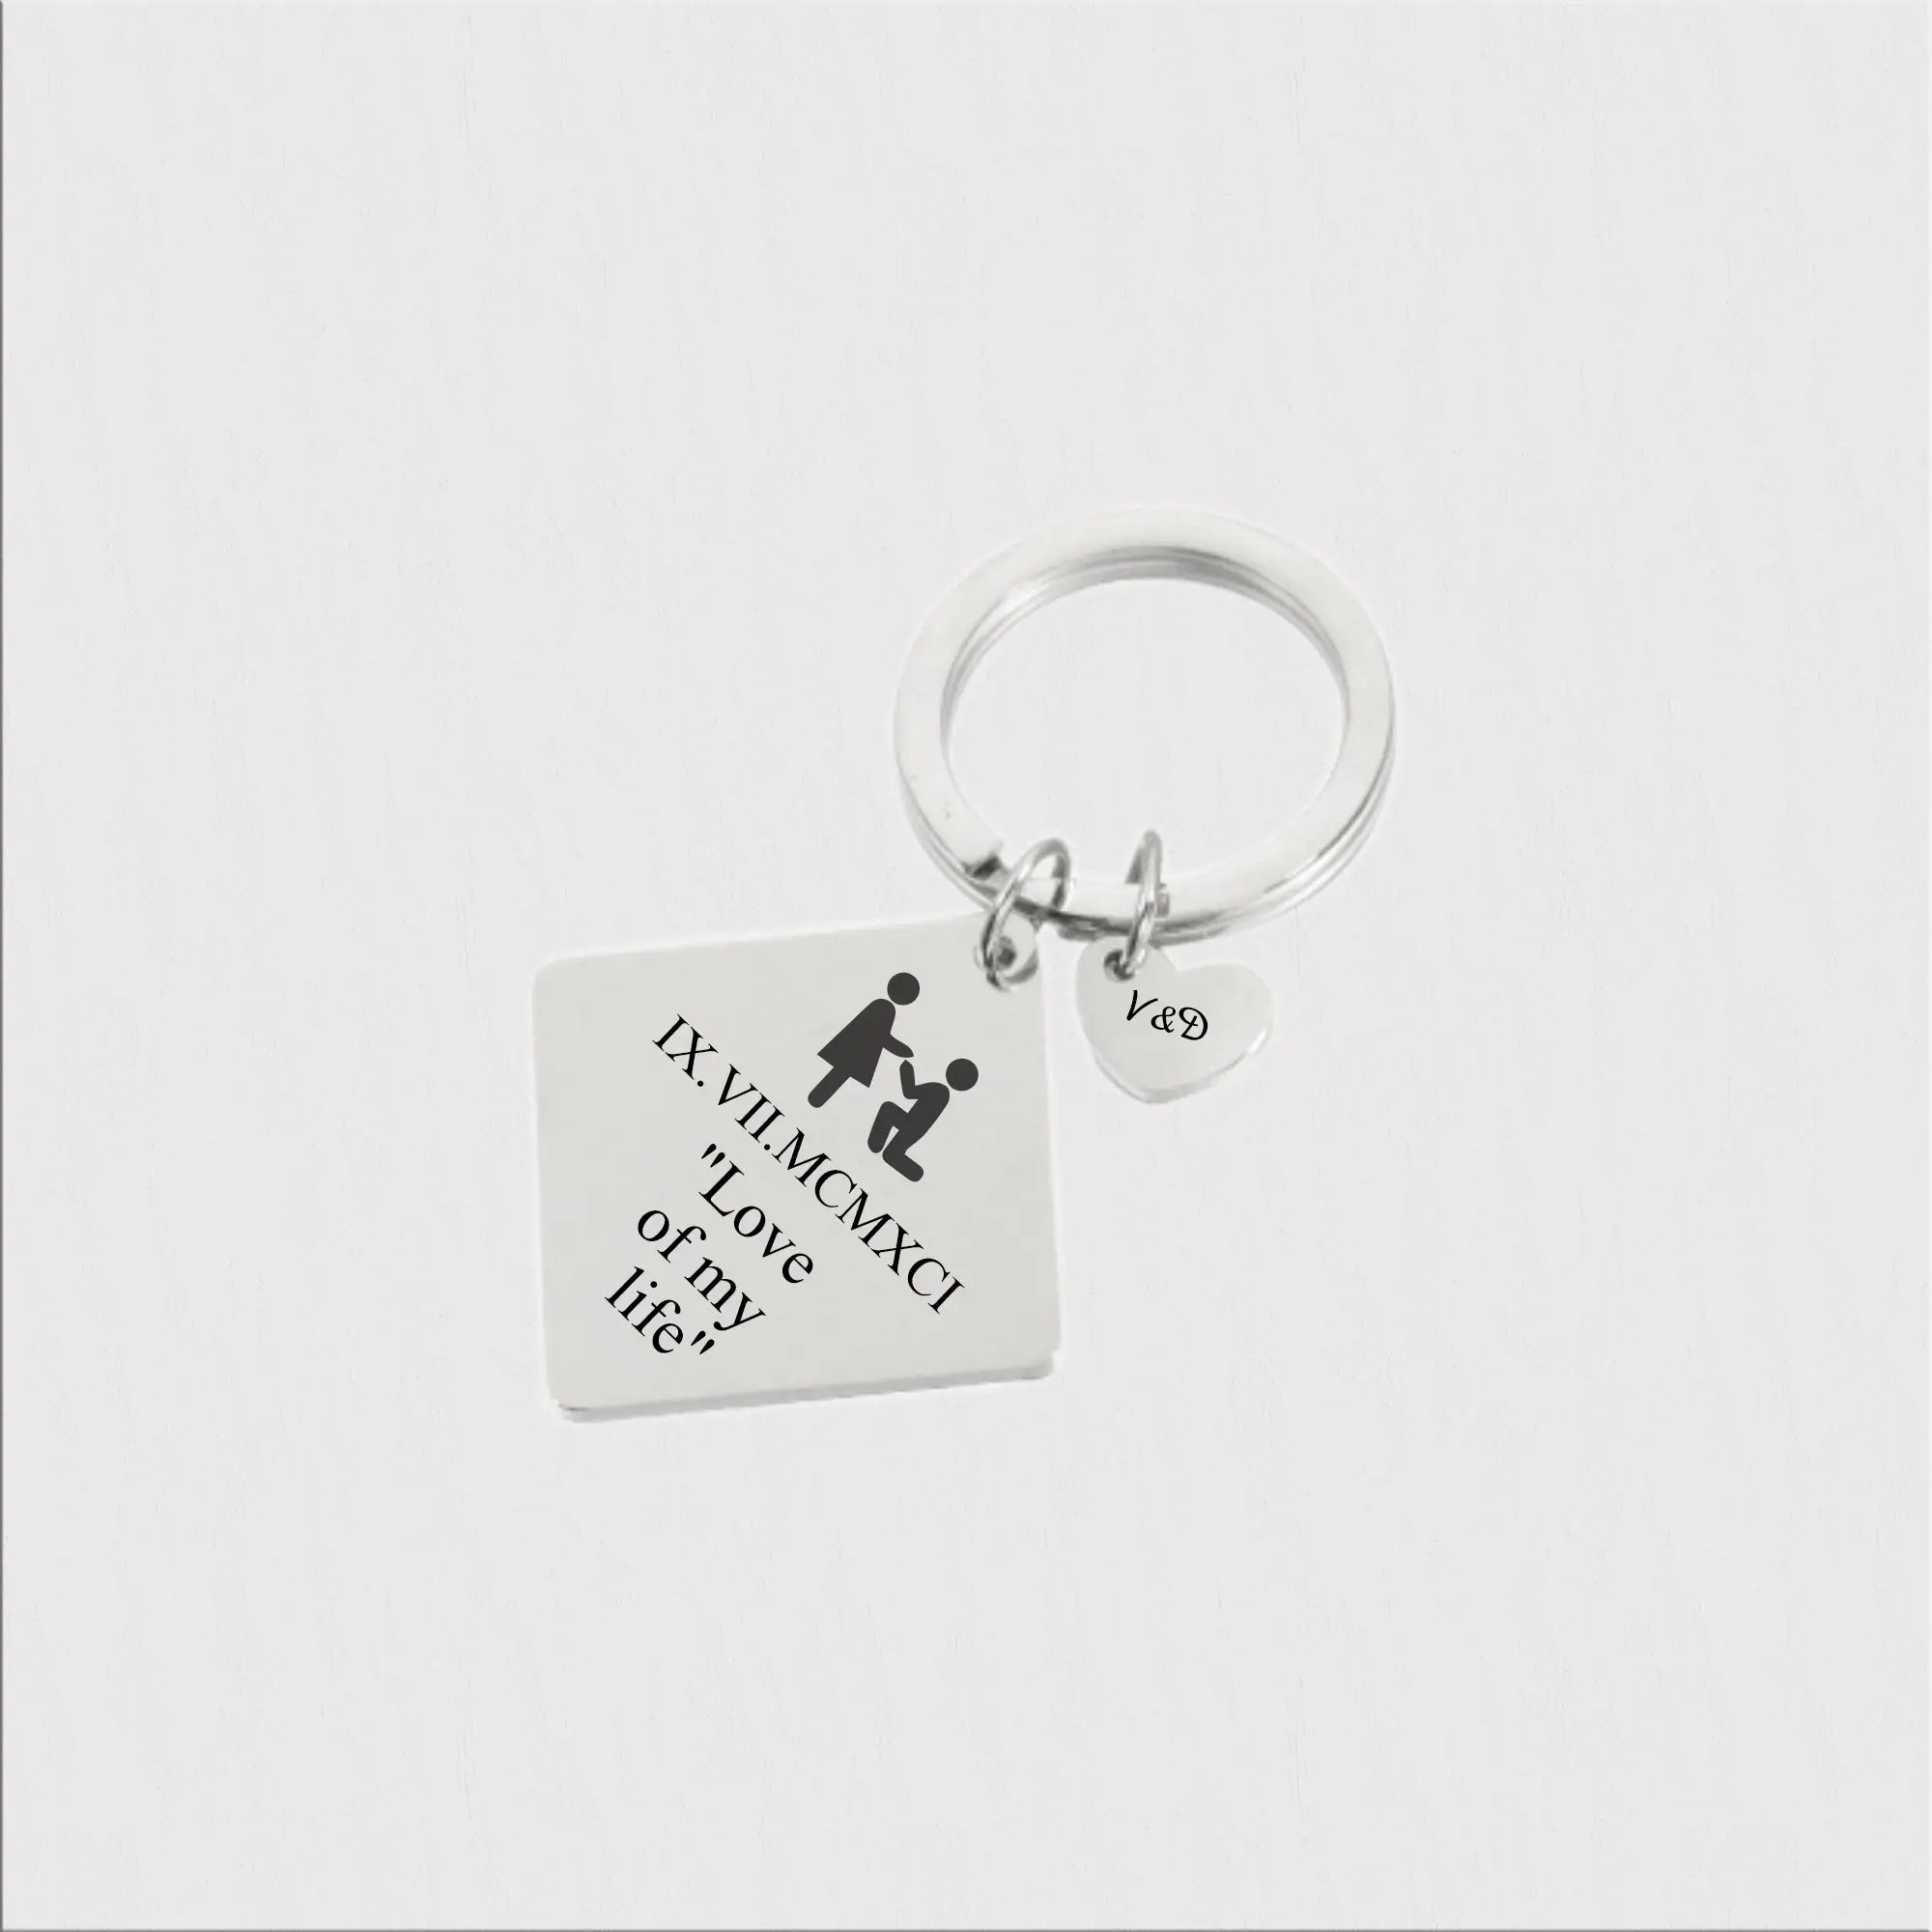  special date keyring, message keychain